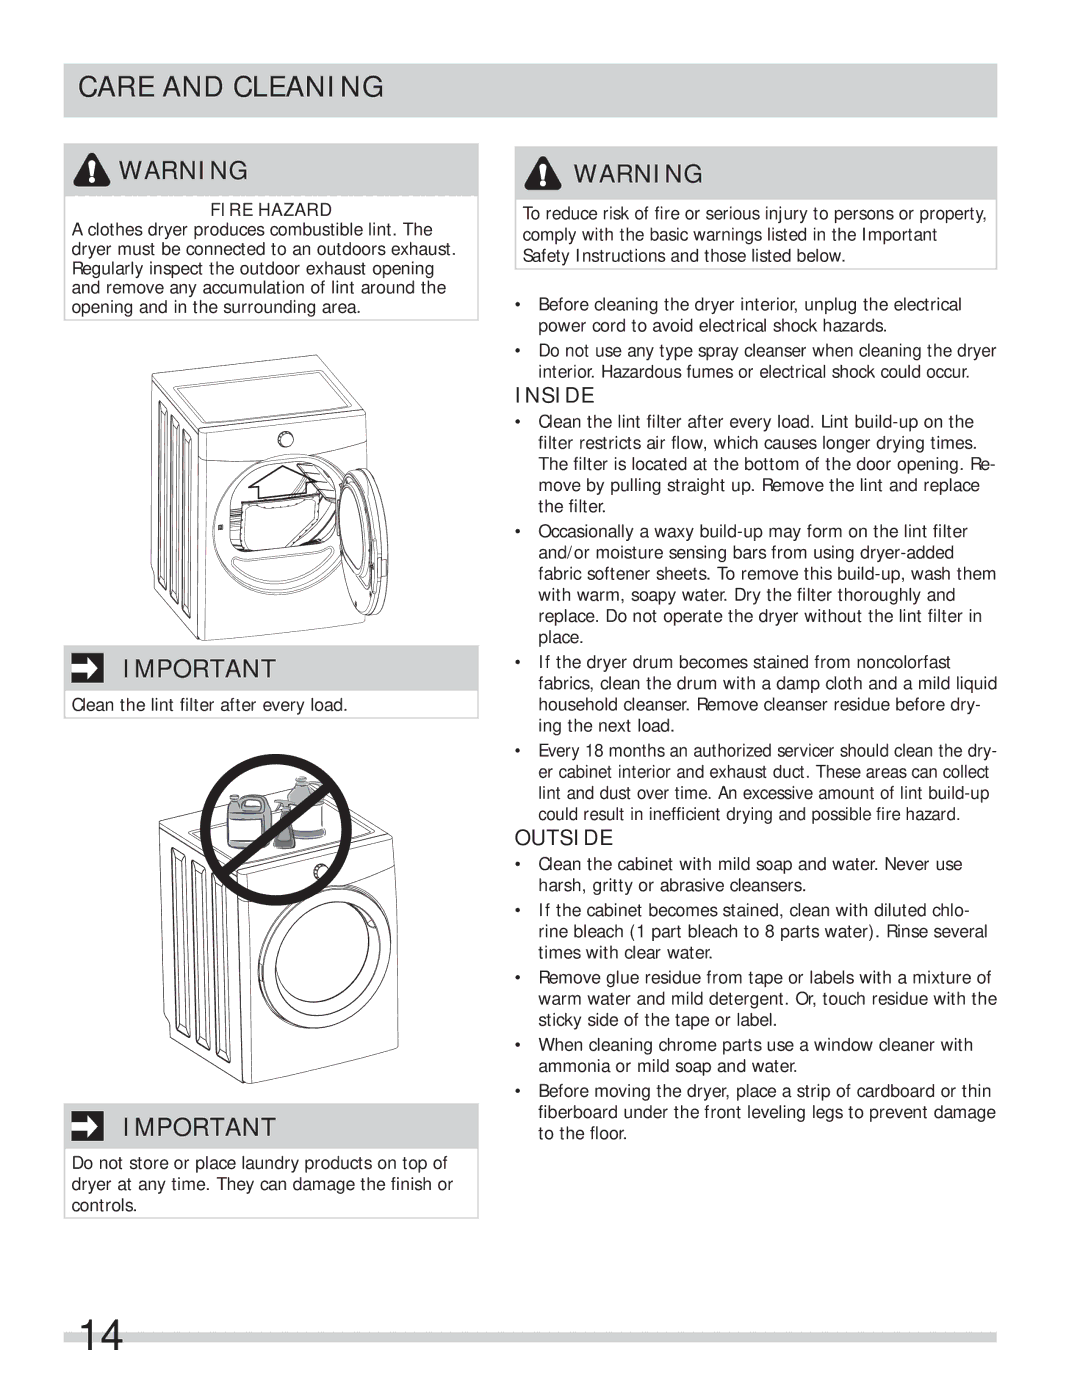 Frigidaire FASG7021NW important safety instructions Care and Cleaning, Inside 